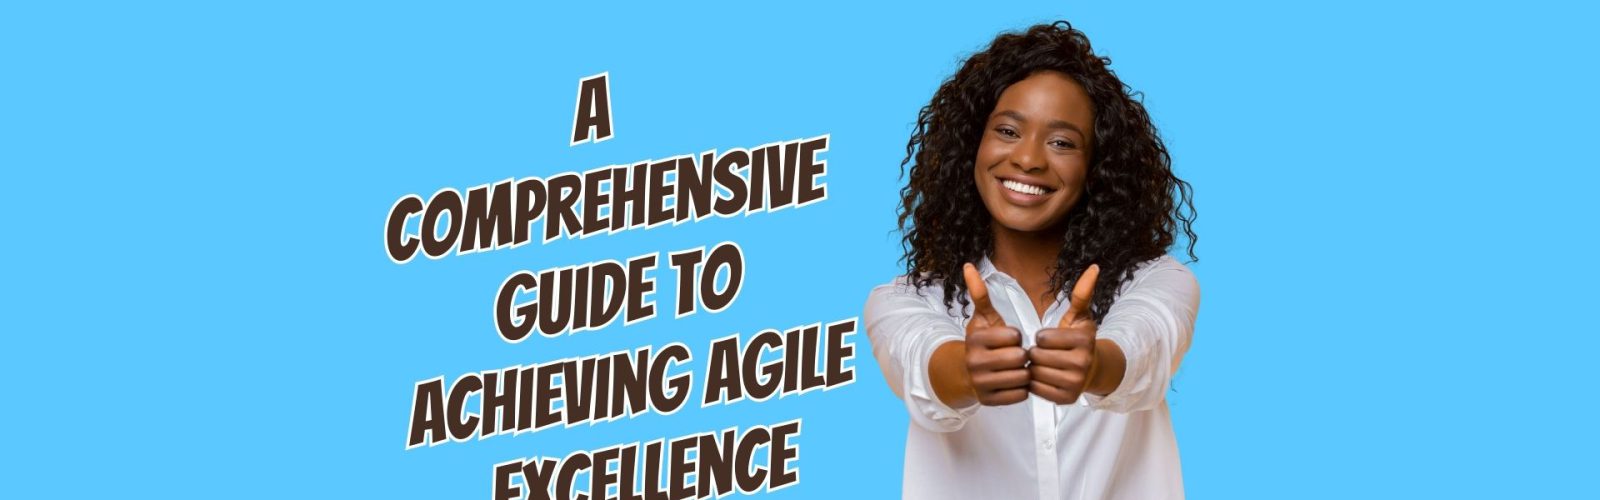 A Comprehensive Guide to Achieving Agile Excellence